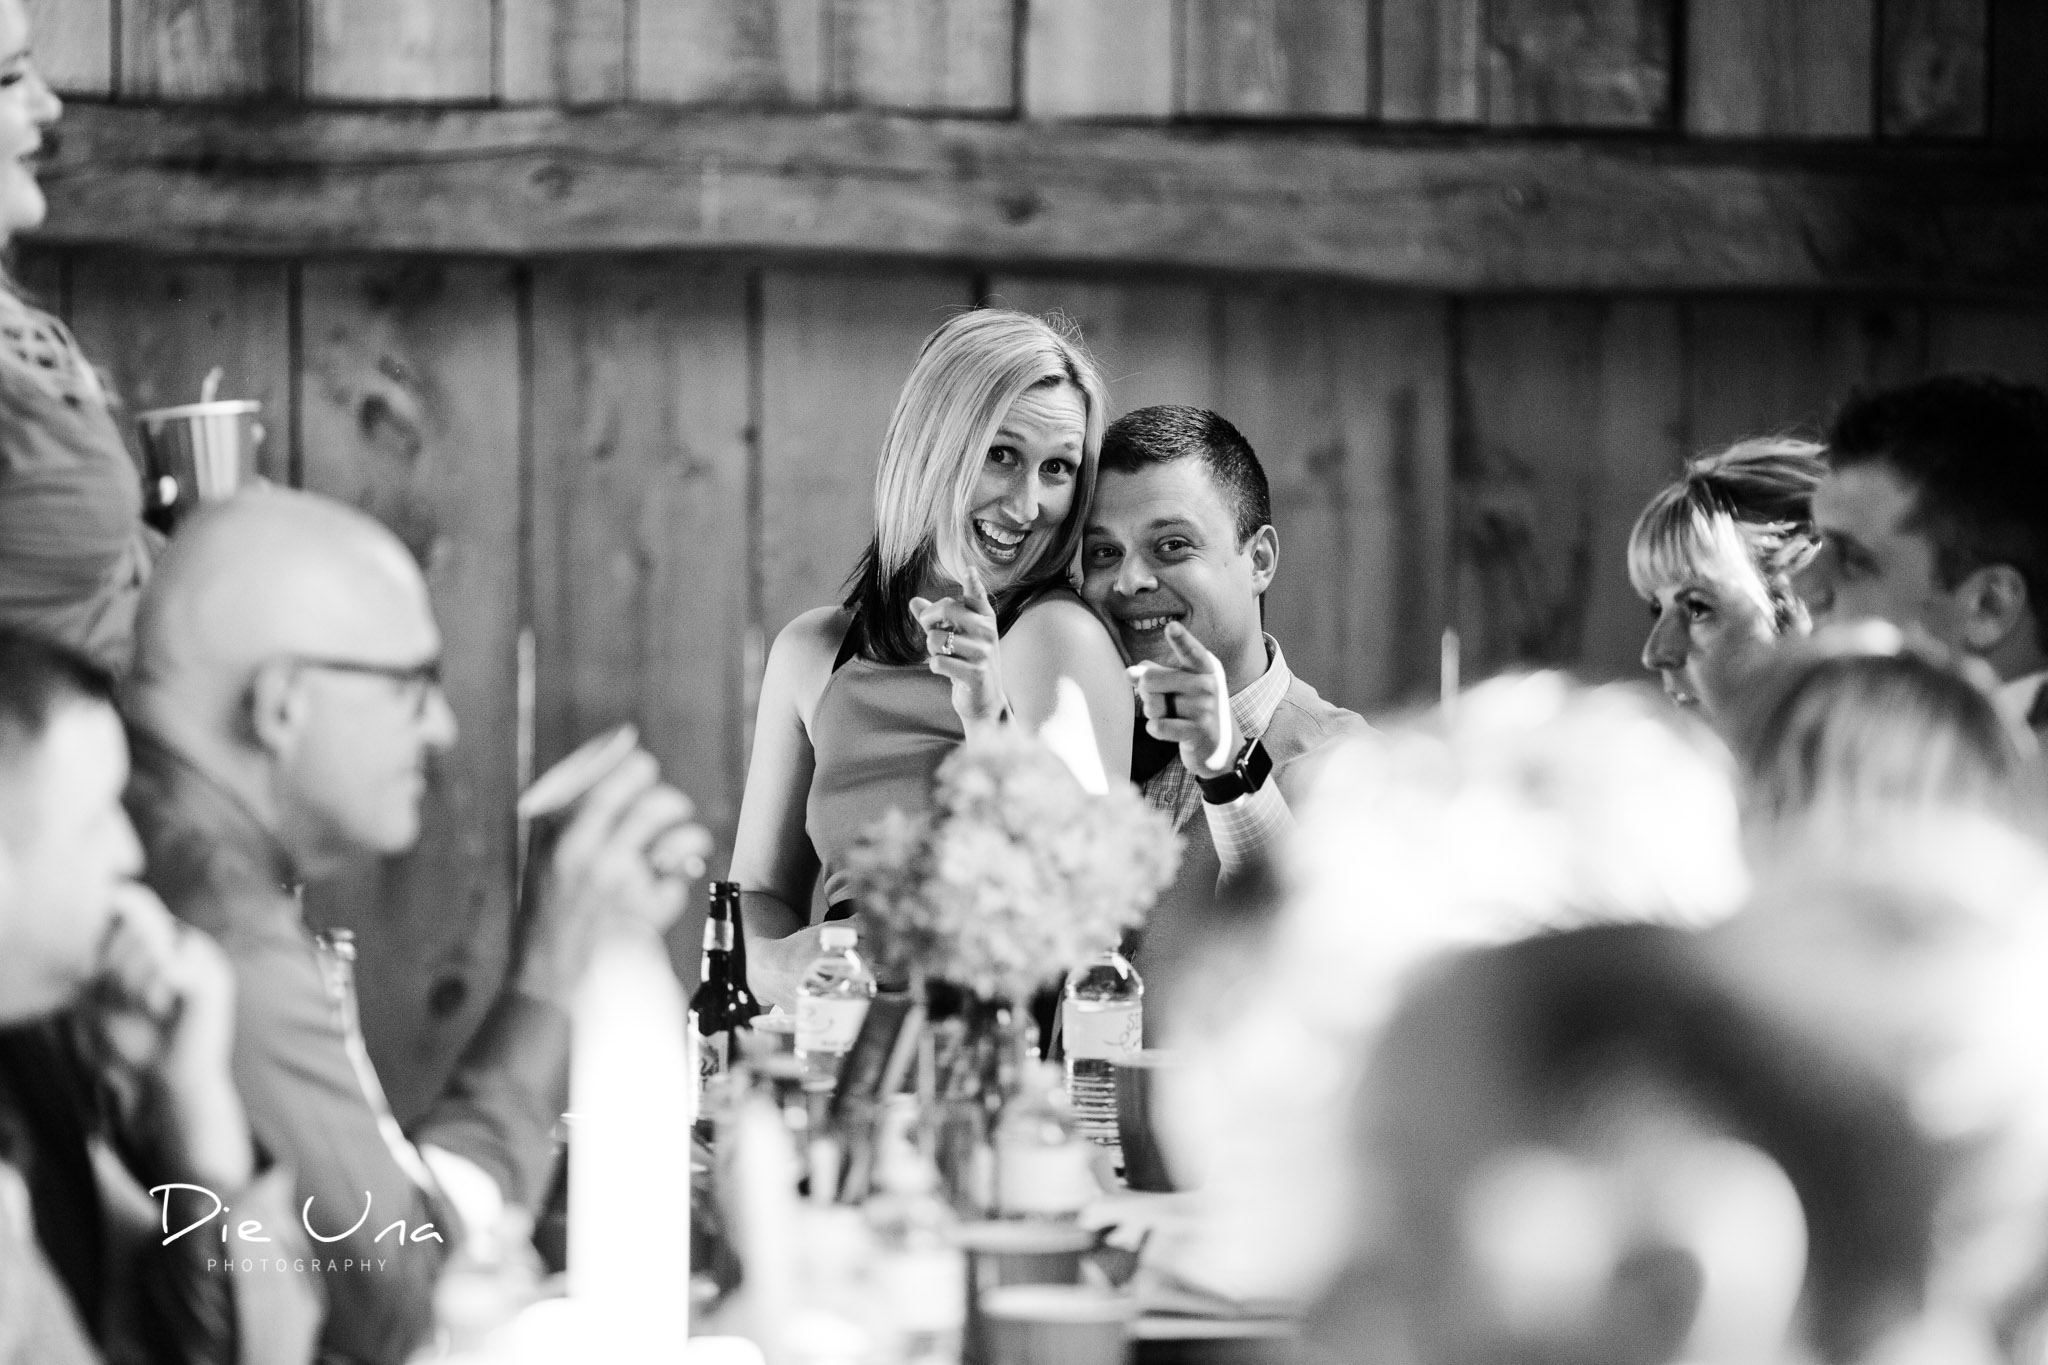 wedding guests being silly during wedding reception black and white candid photography.jpg